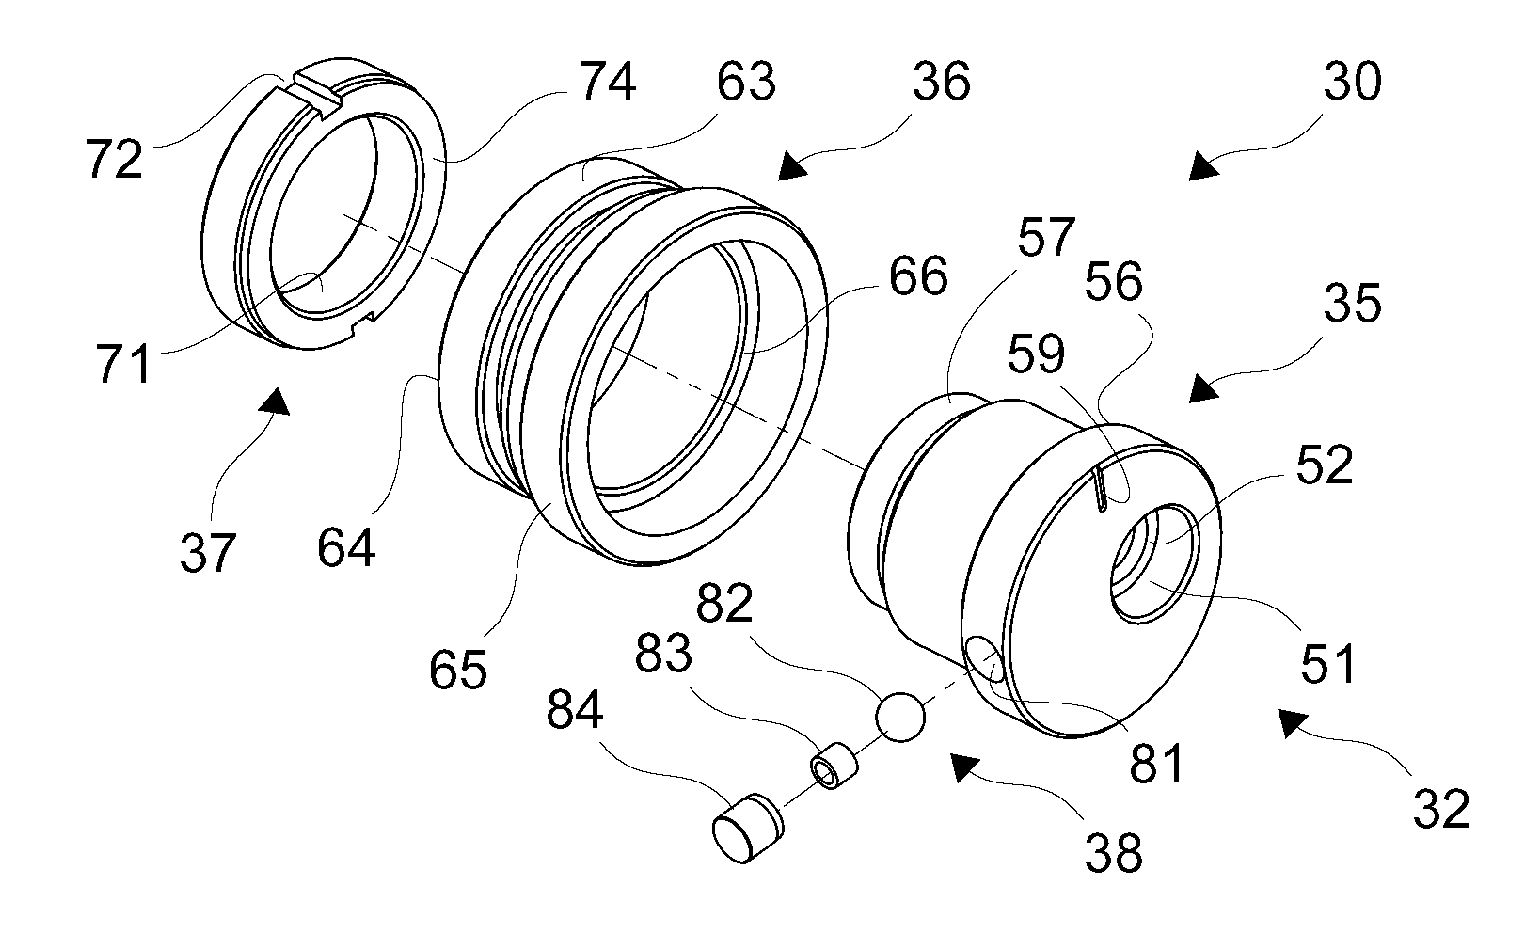 Adapter device to couple an endoscope with a medical appliance